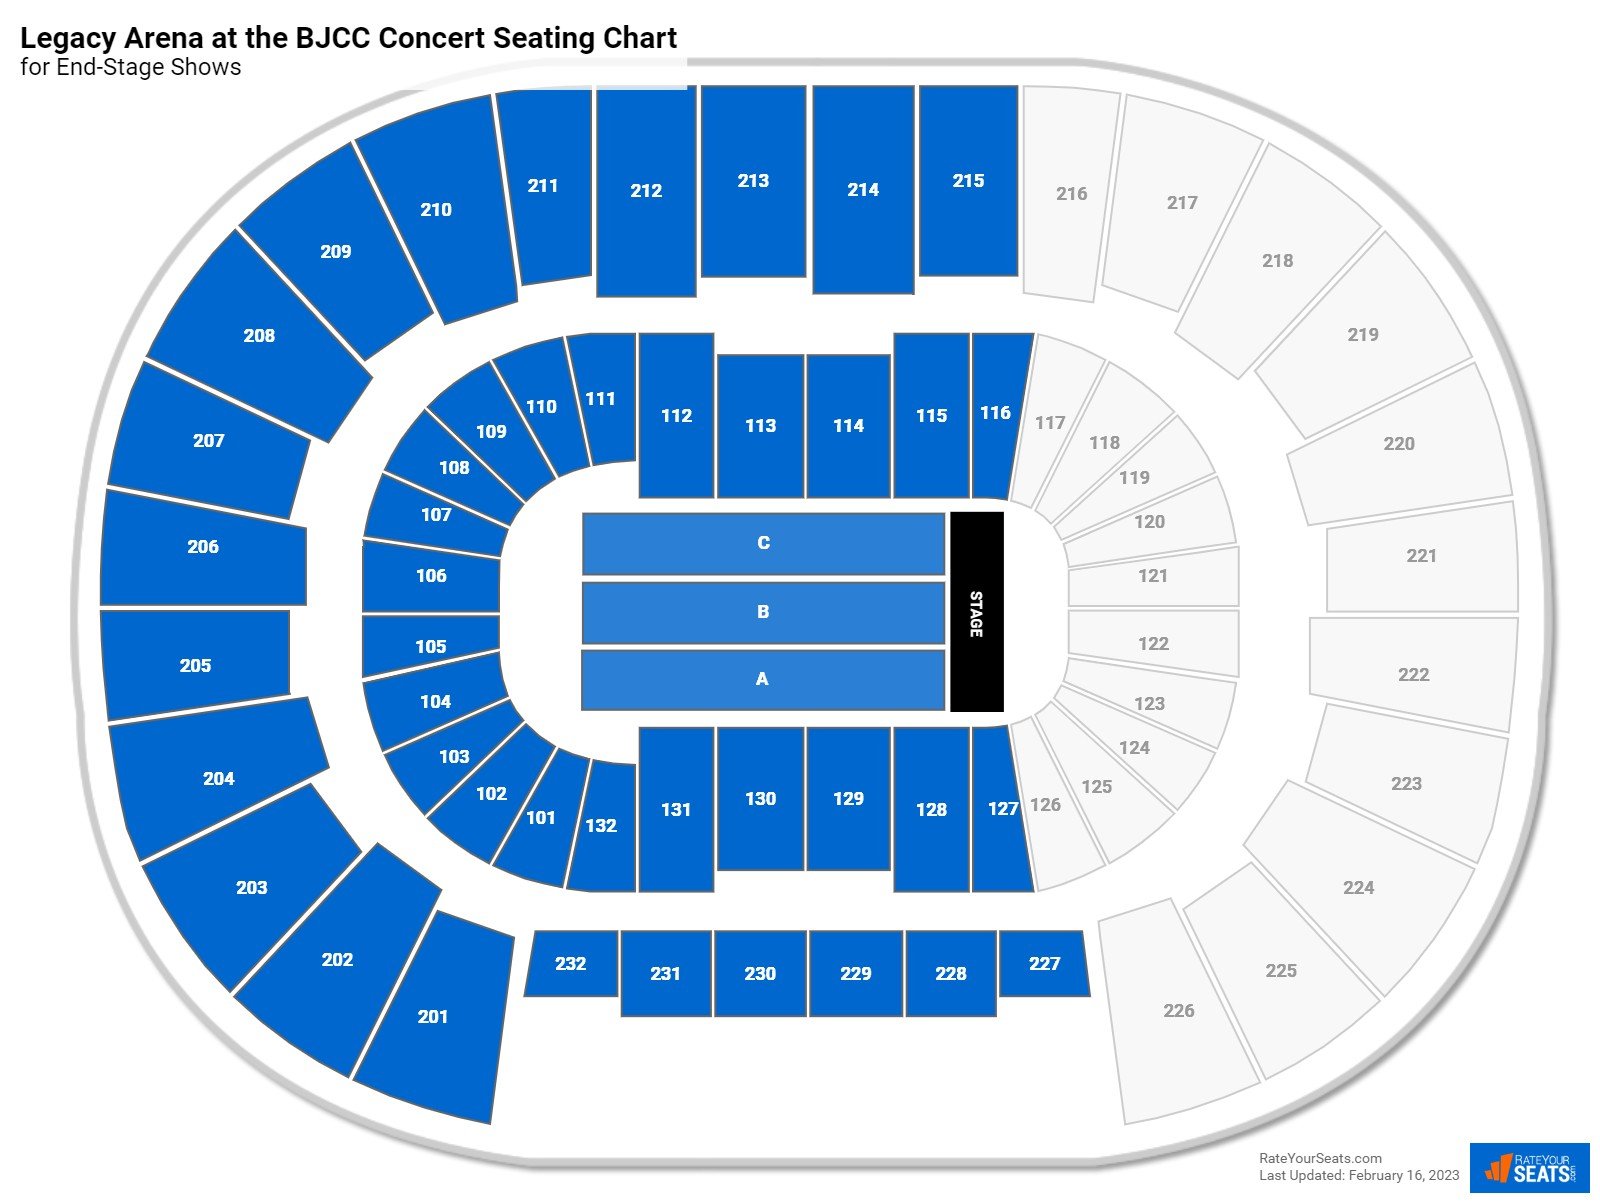 Legacy Arena at the BJCC Concert Seating Chart